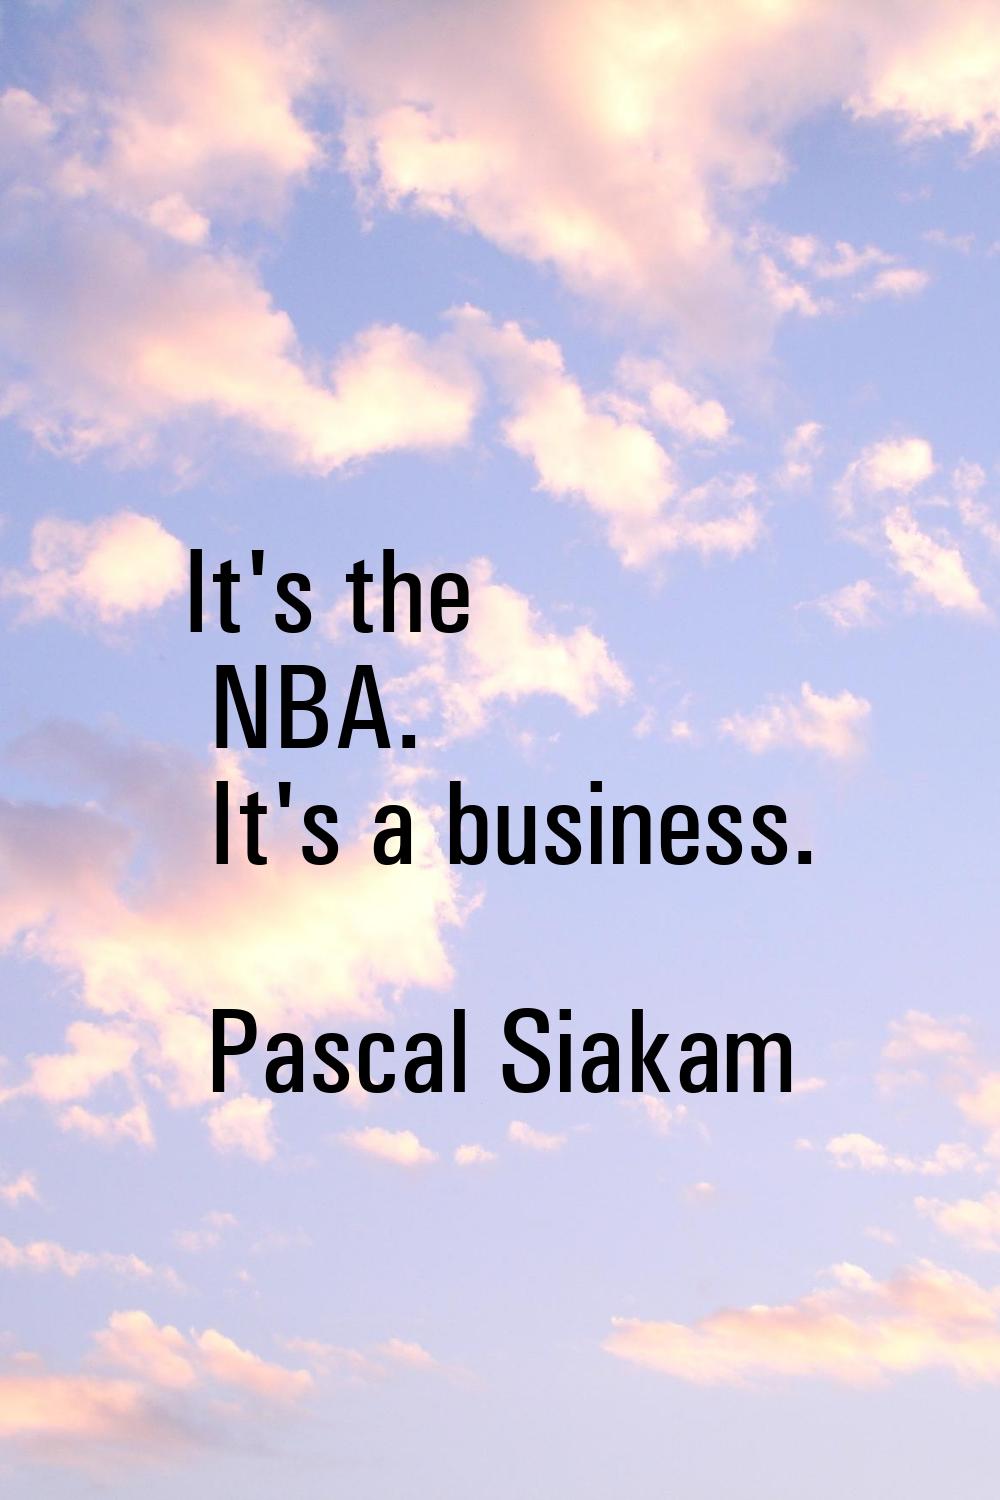 It's the NBA. It's a business.